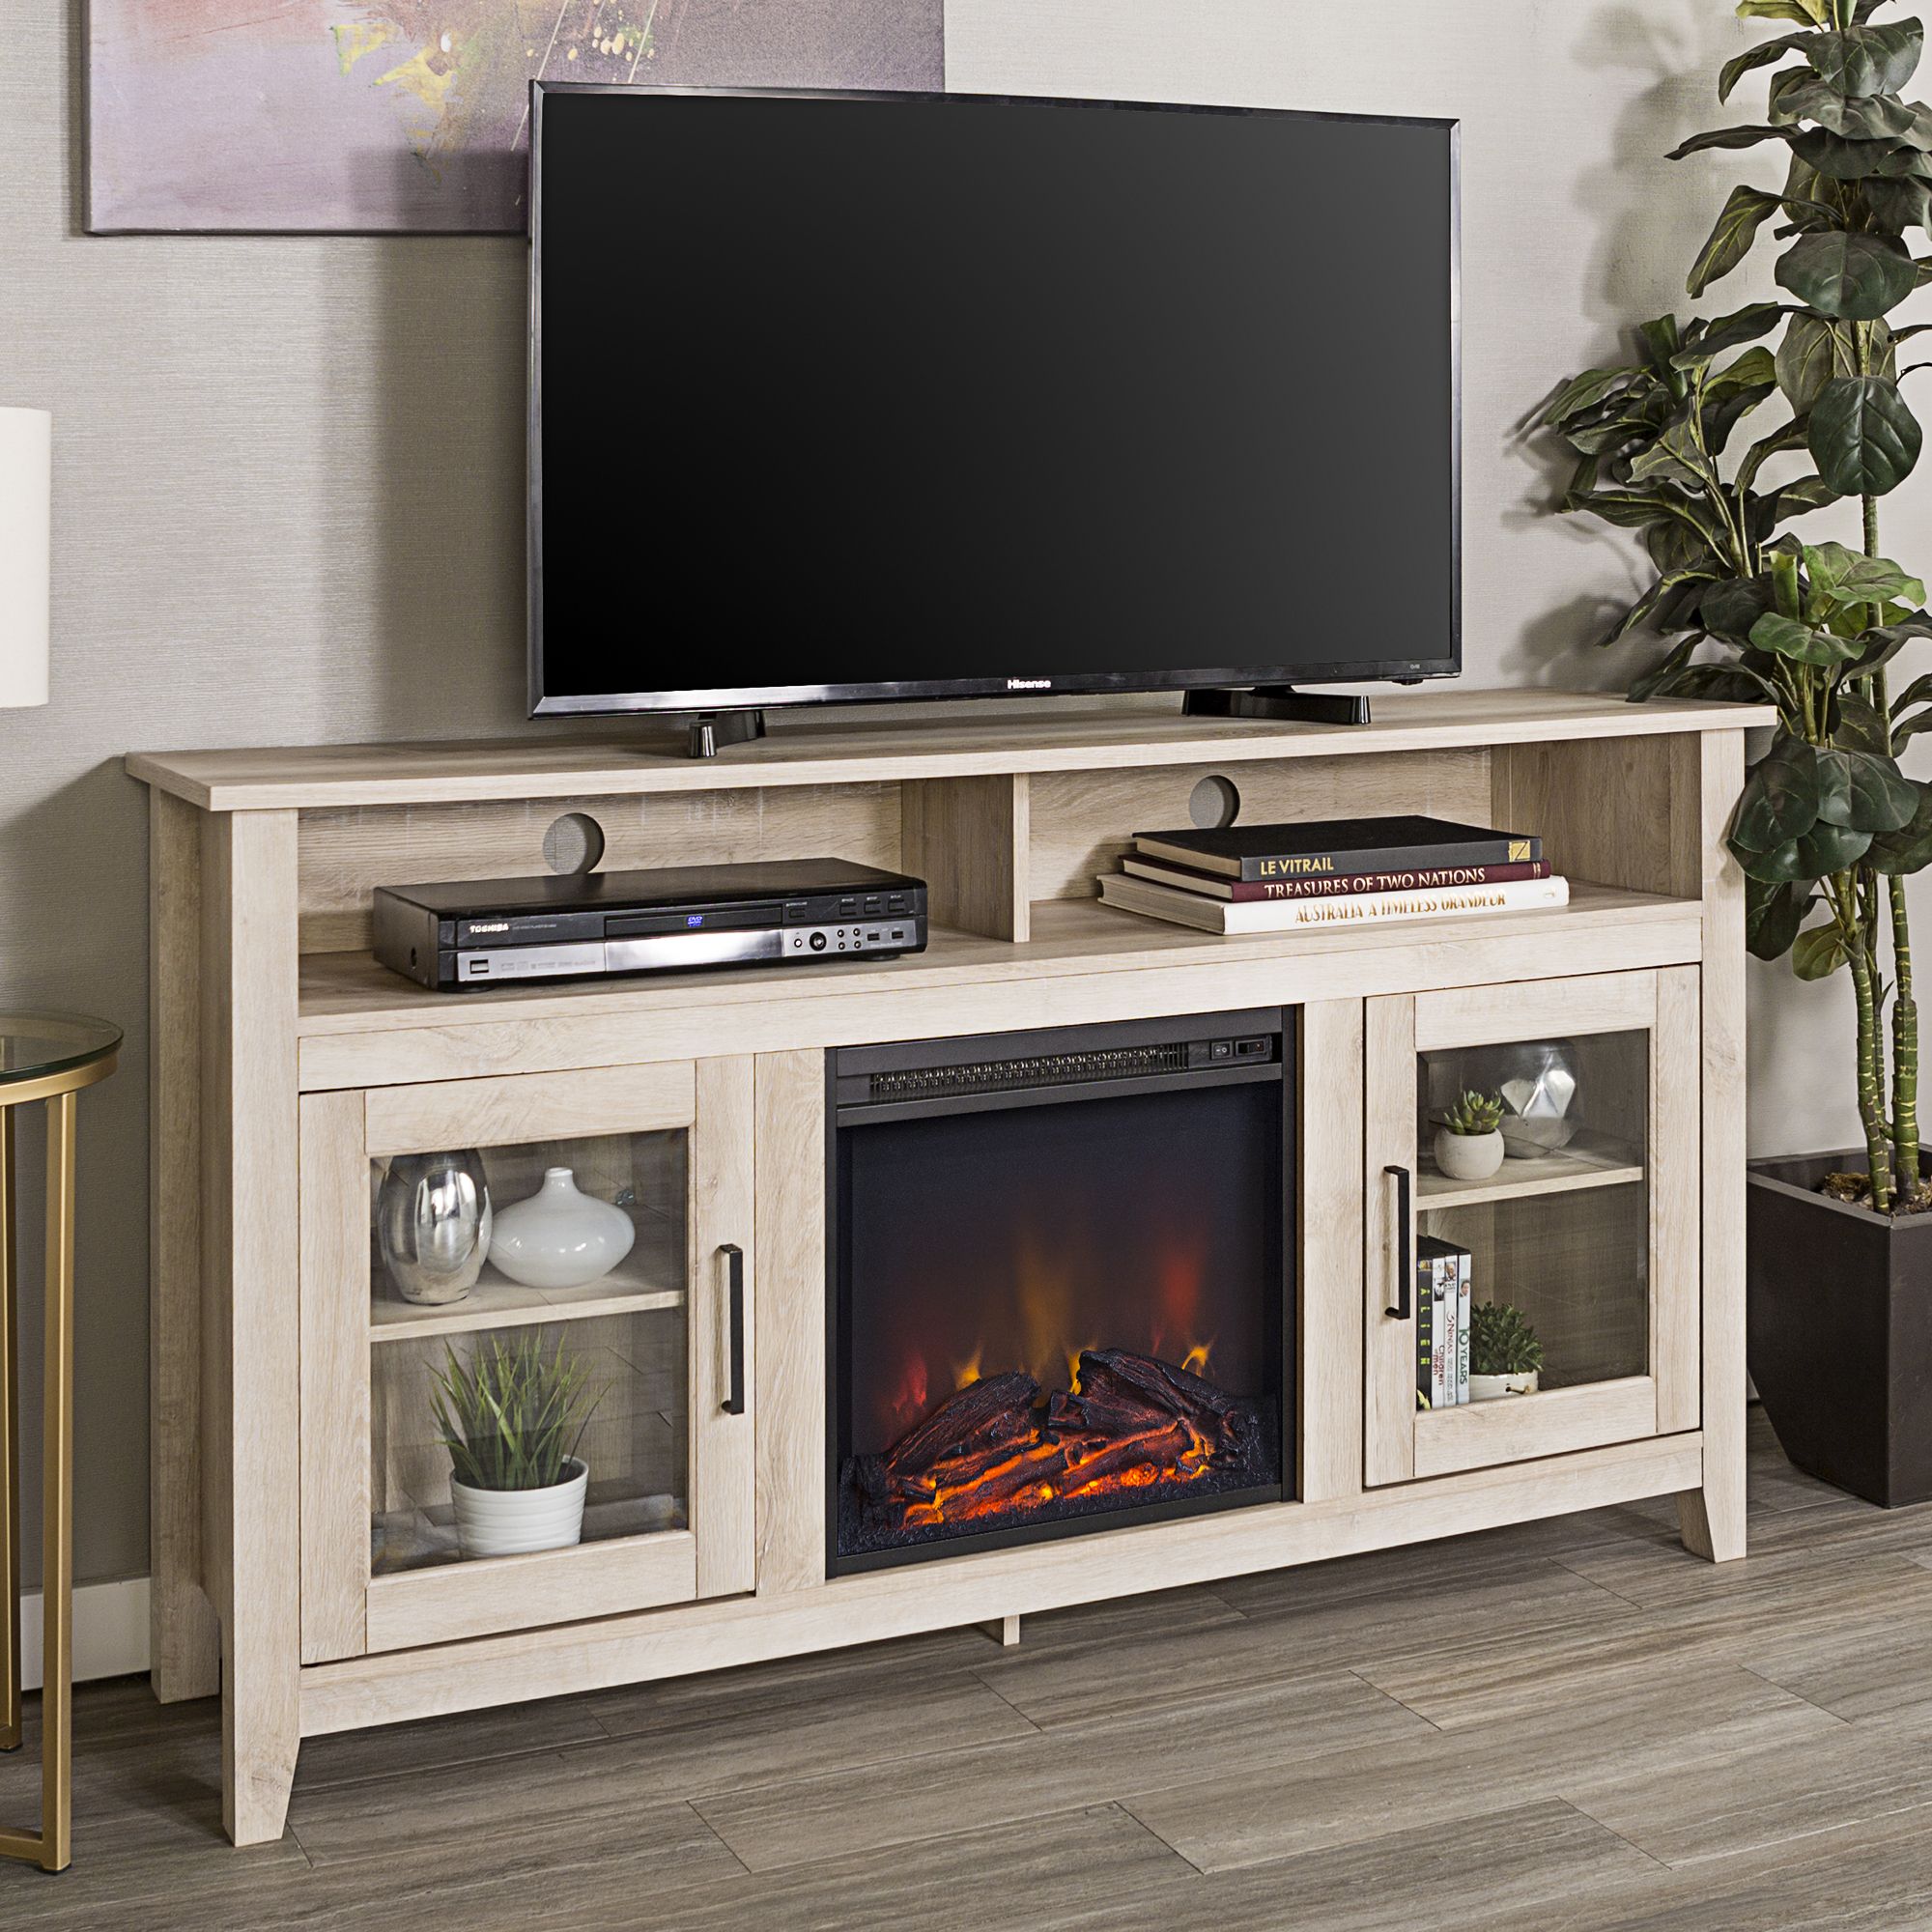 Walker Edison Tall Fireplace Tv Stand For Tvs Up To 64 Intended For Freestanding Tv Stands (View 5 of 15)